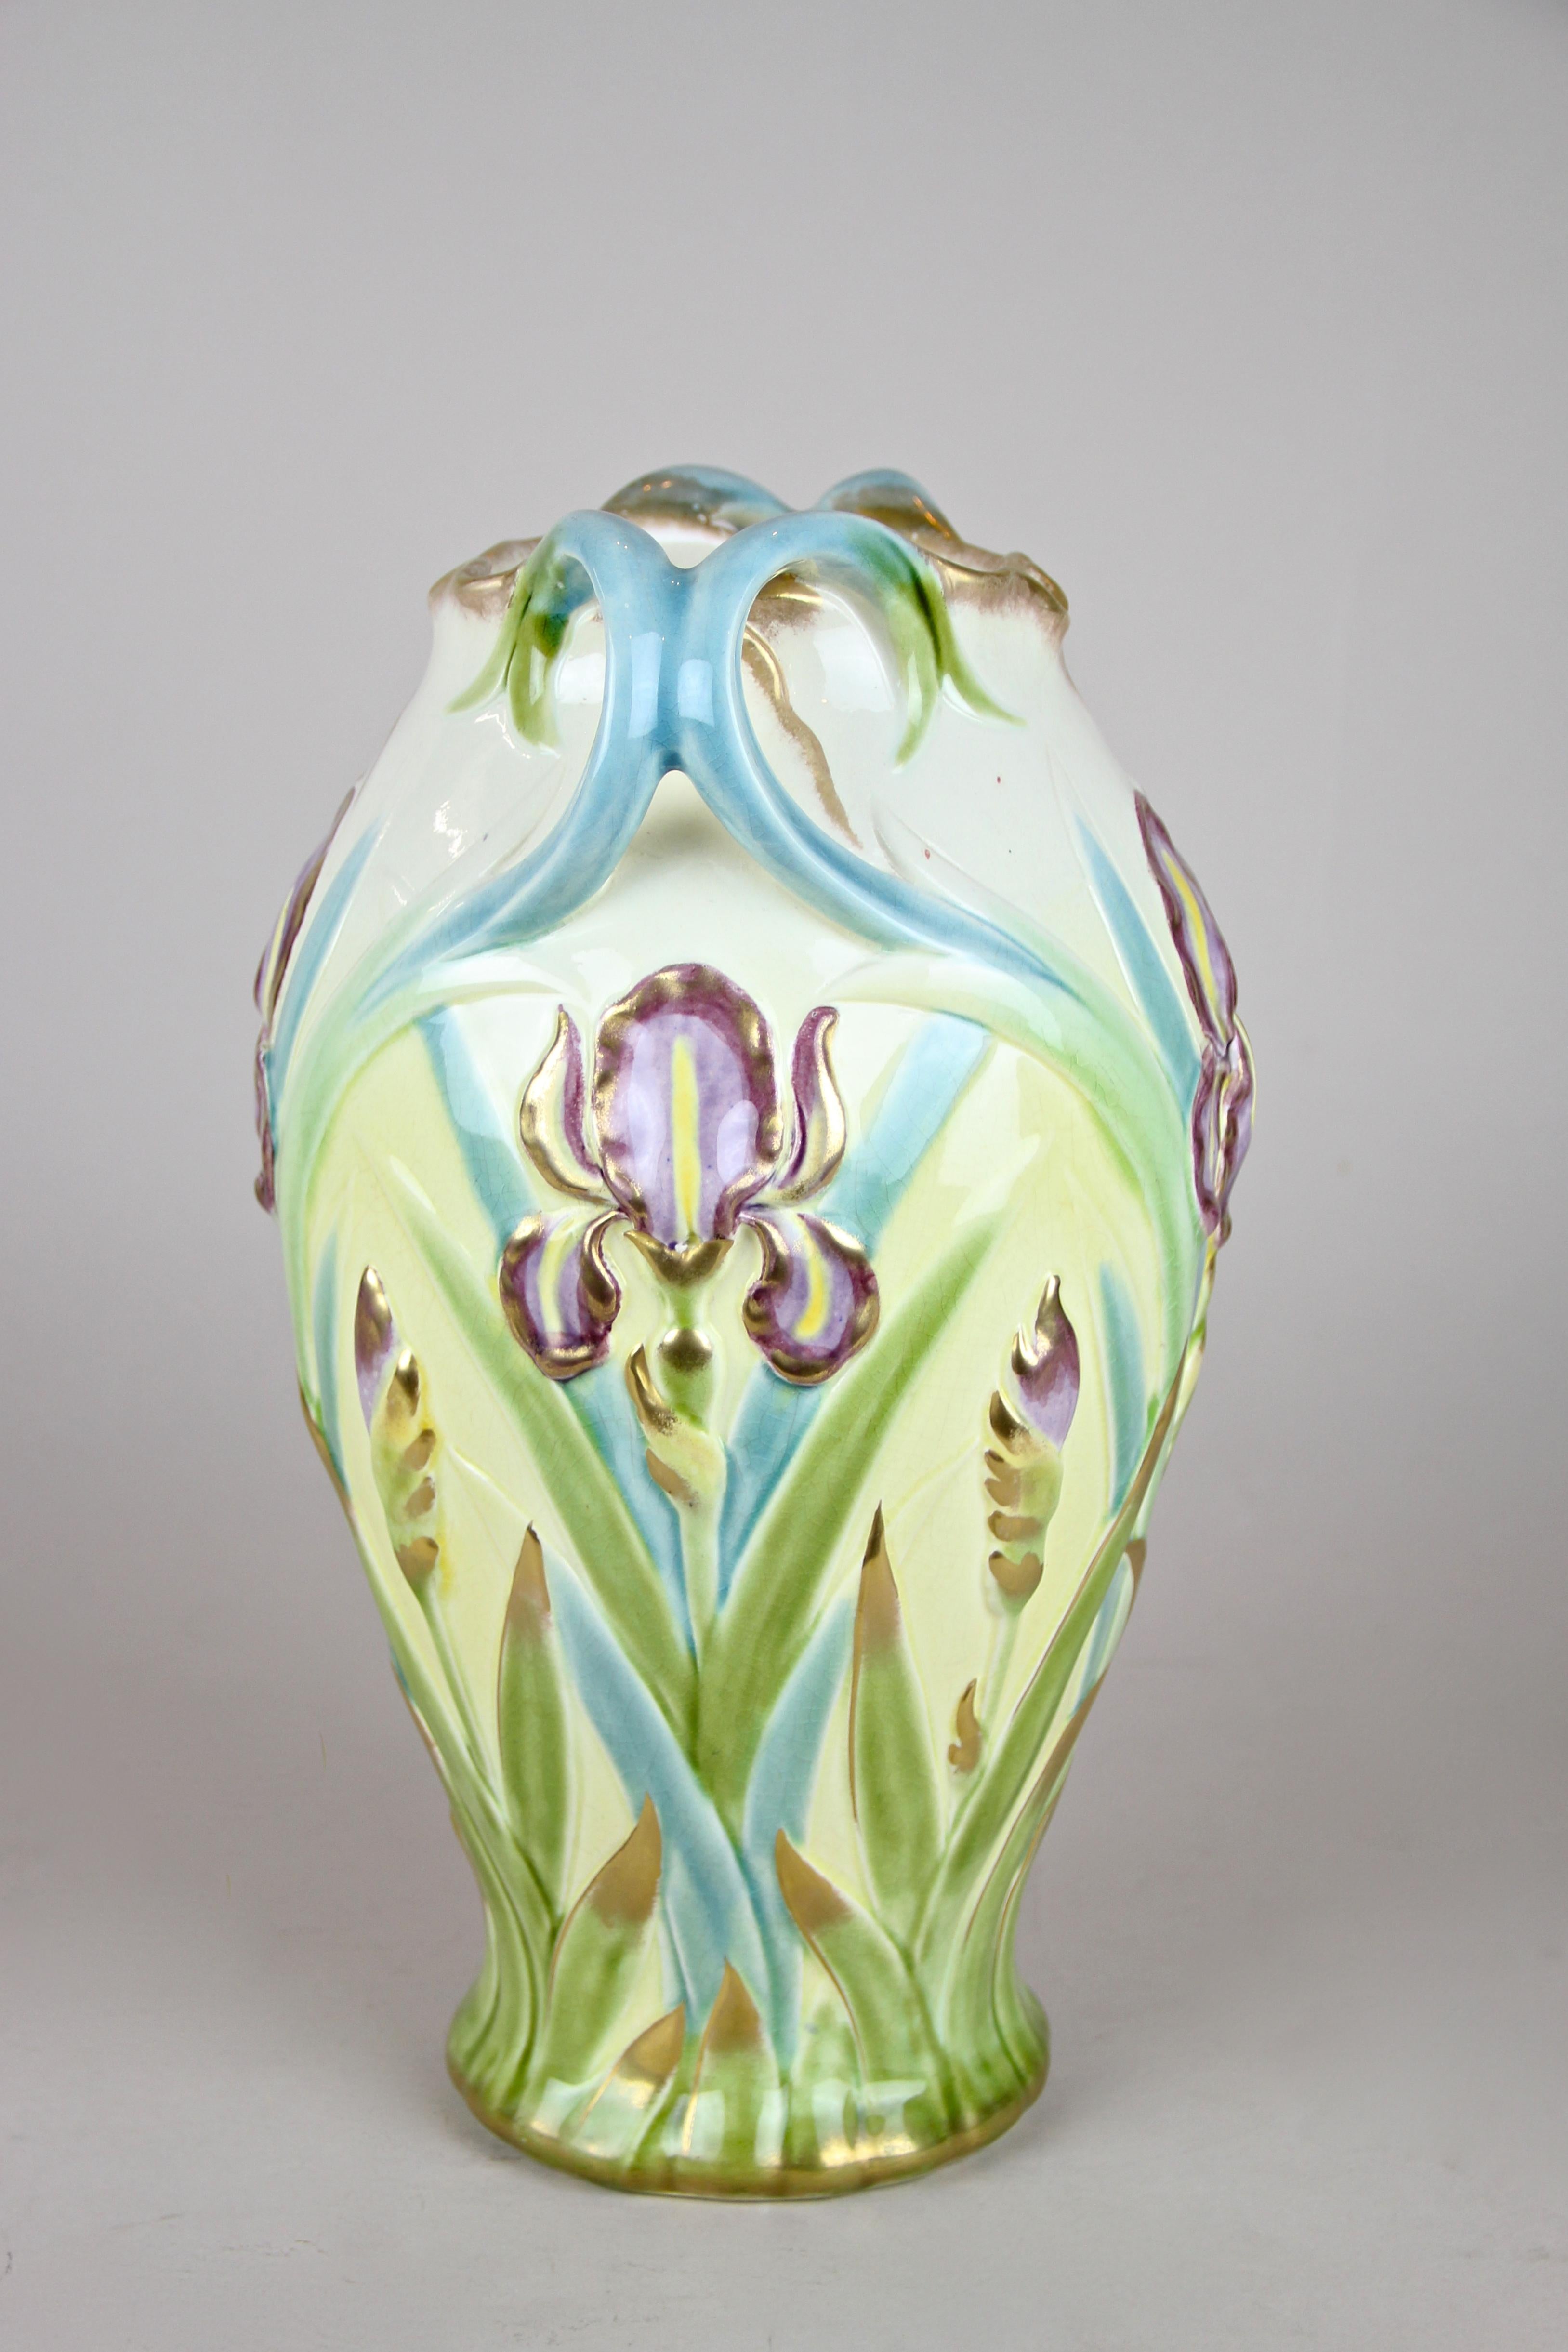 20th Century French Majolica Vase by Sarreguemines Floral Design, France, circa 1915